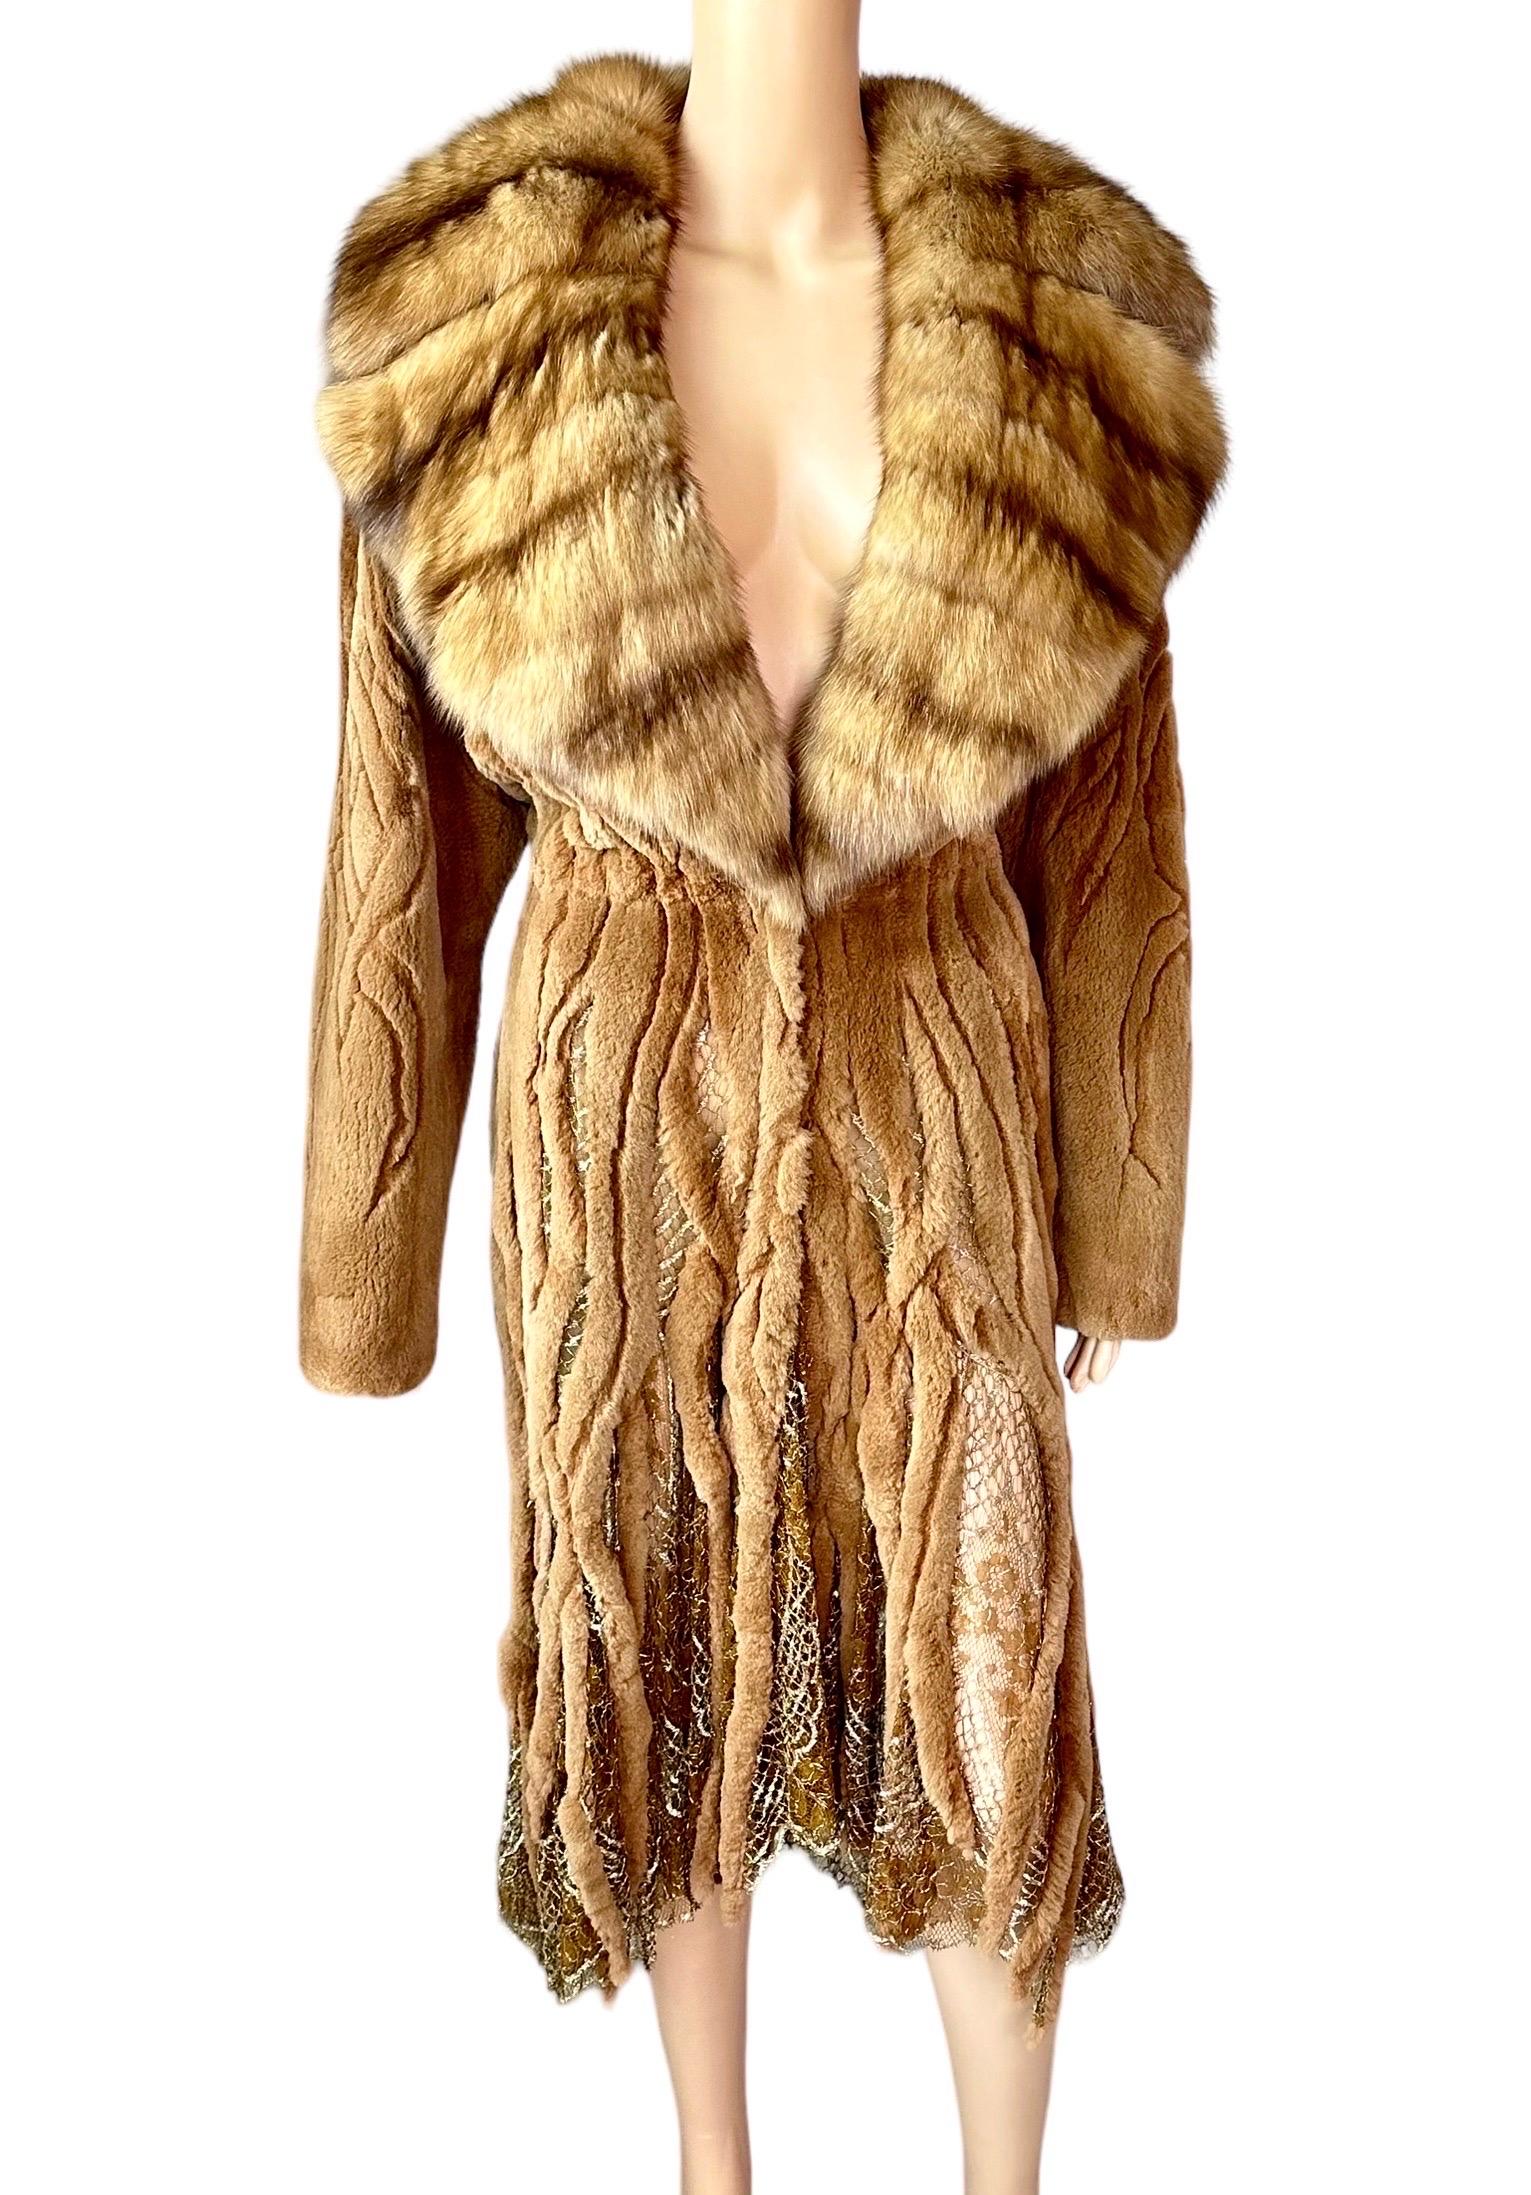 Atelier Gianni Versace c.1996 Fur Cutout Sheer Lace Mesh Panels Jacket Coat In Good Condition For Sale In Naples, FL